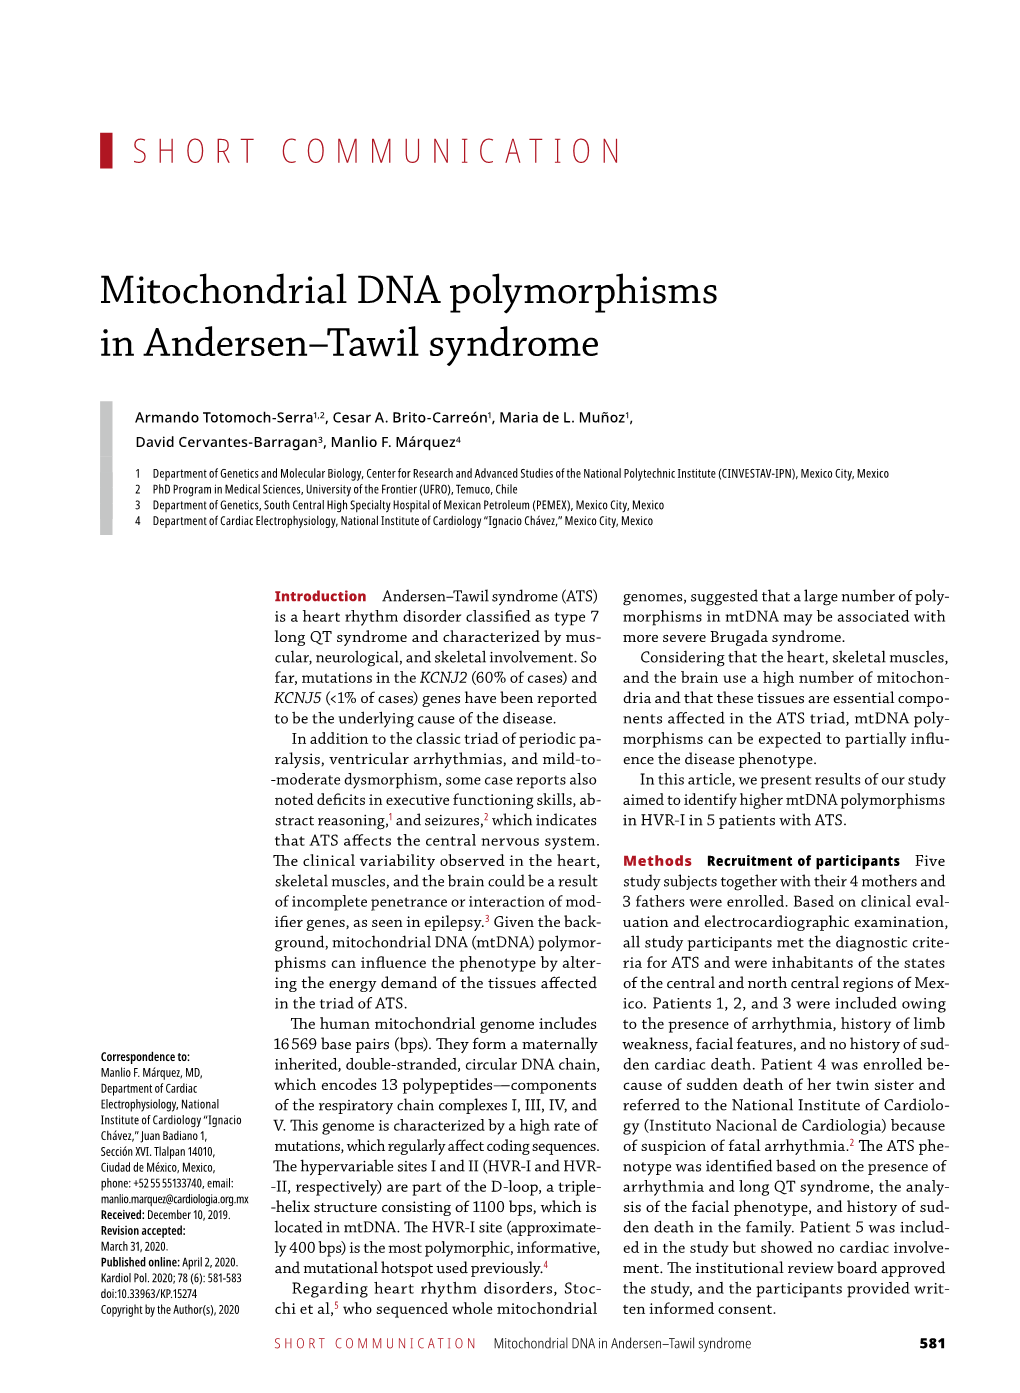 Mitochondrial DNA Polymorphisms in Andersen–Tawil Syndrome